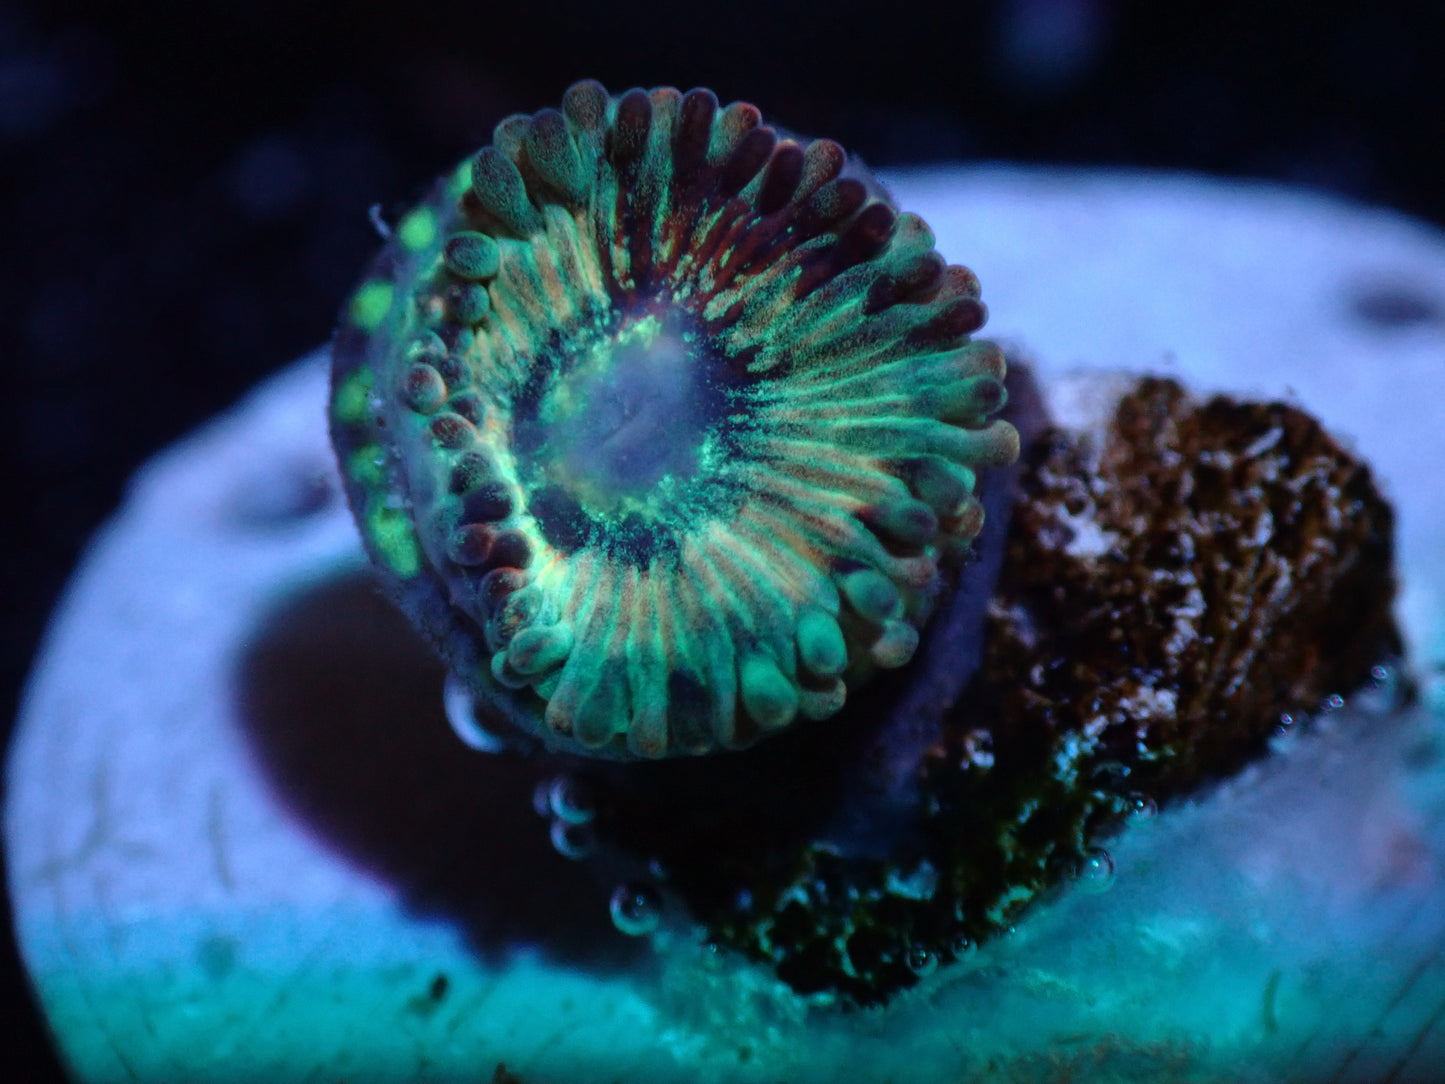 Salted Agave Zoa Auctions 3/27 ended